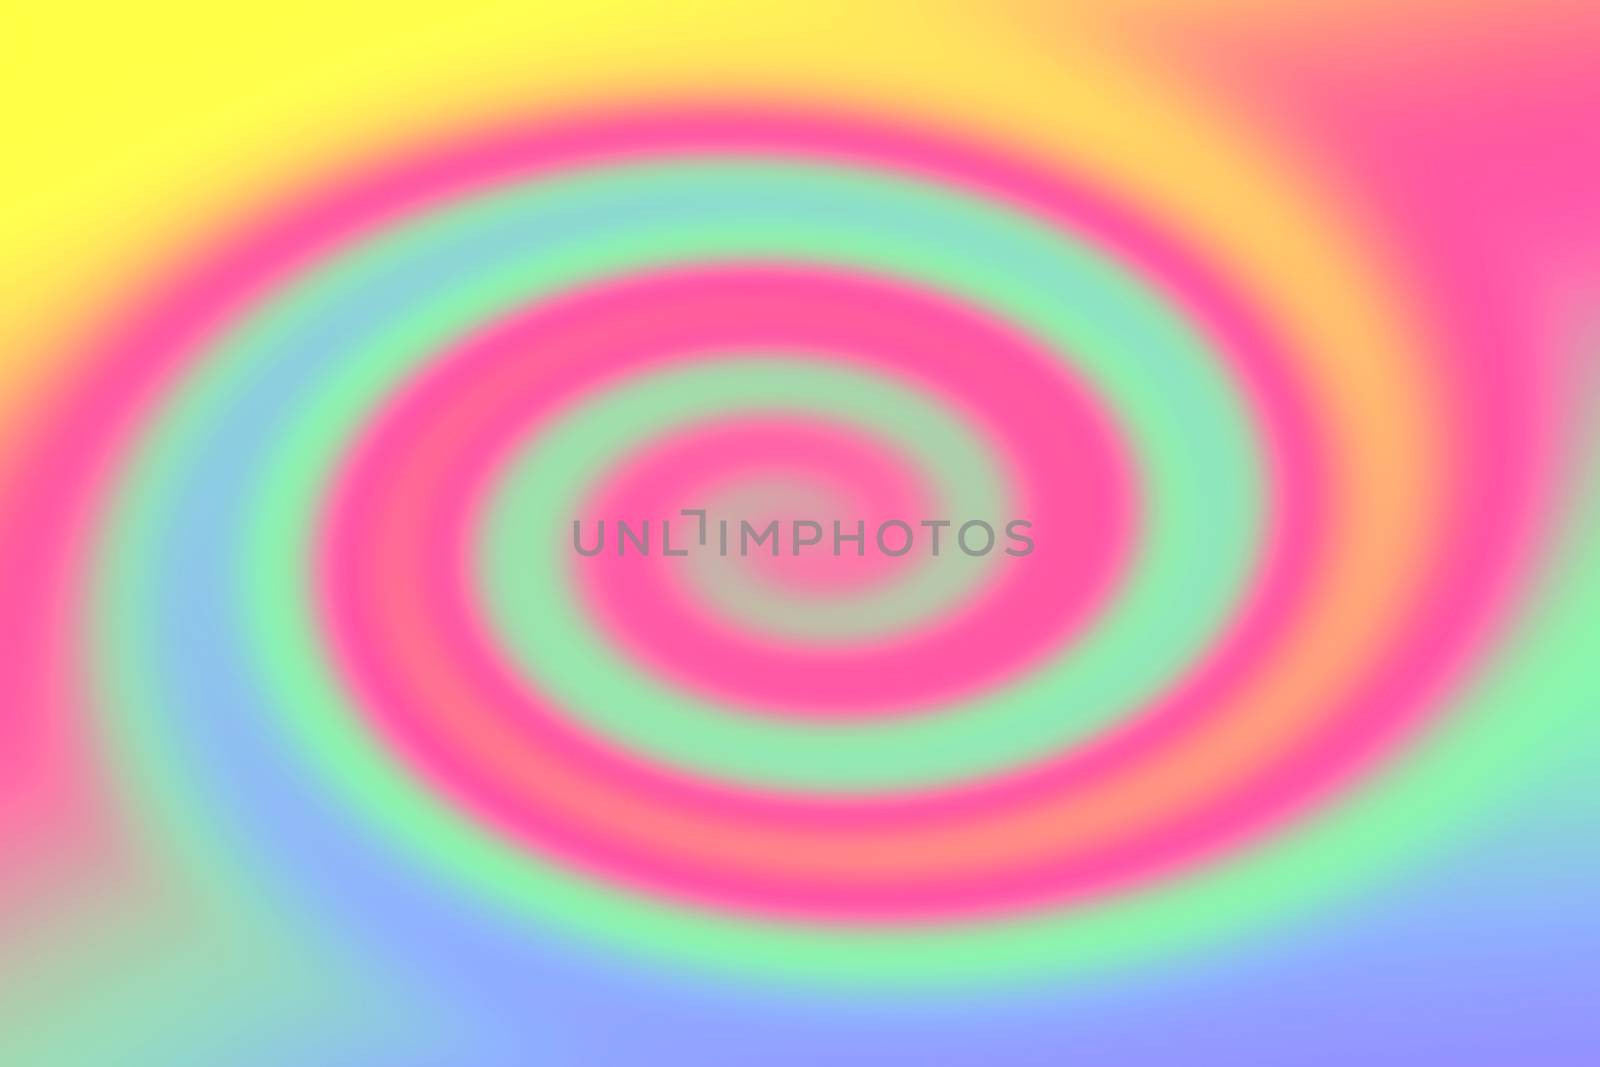 blurred twist colorful bright gradient, rainbow colorful light swirl wave effect background, colorful gradient soft wallpaper sweet swirl rainbow